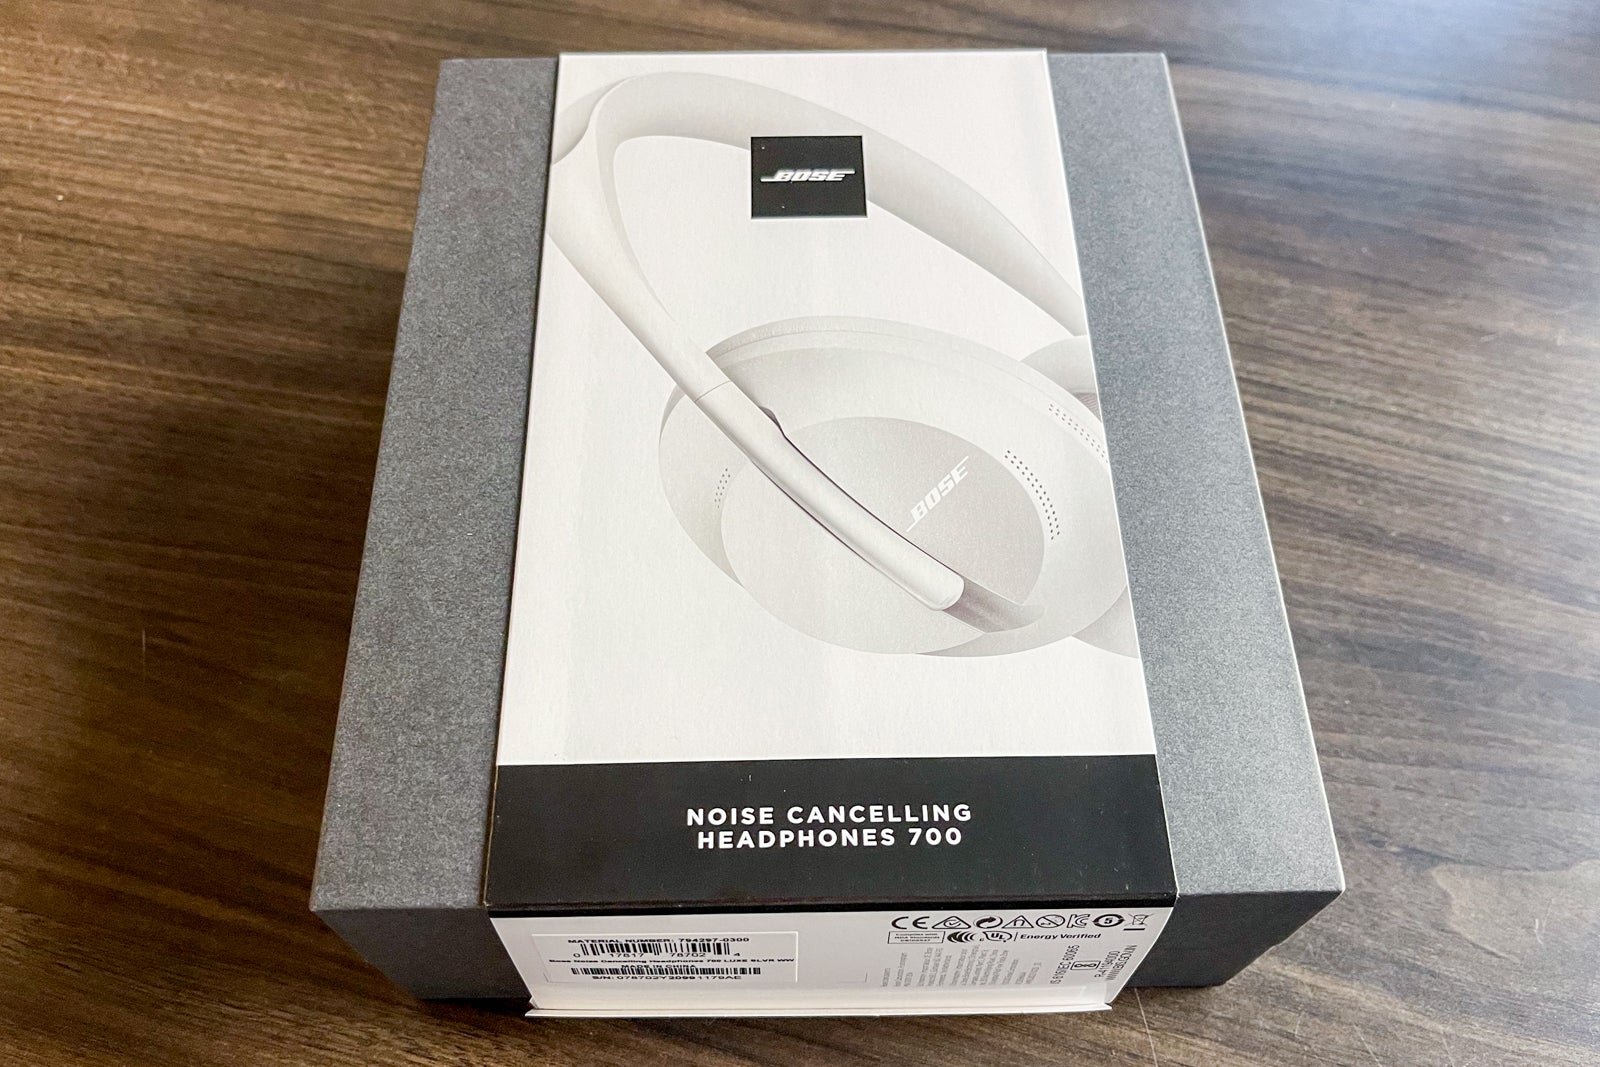 Bose Noise Cancelling Headphones 700 review: taking back the crown